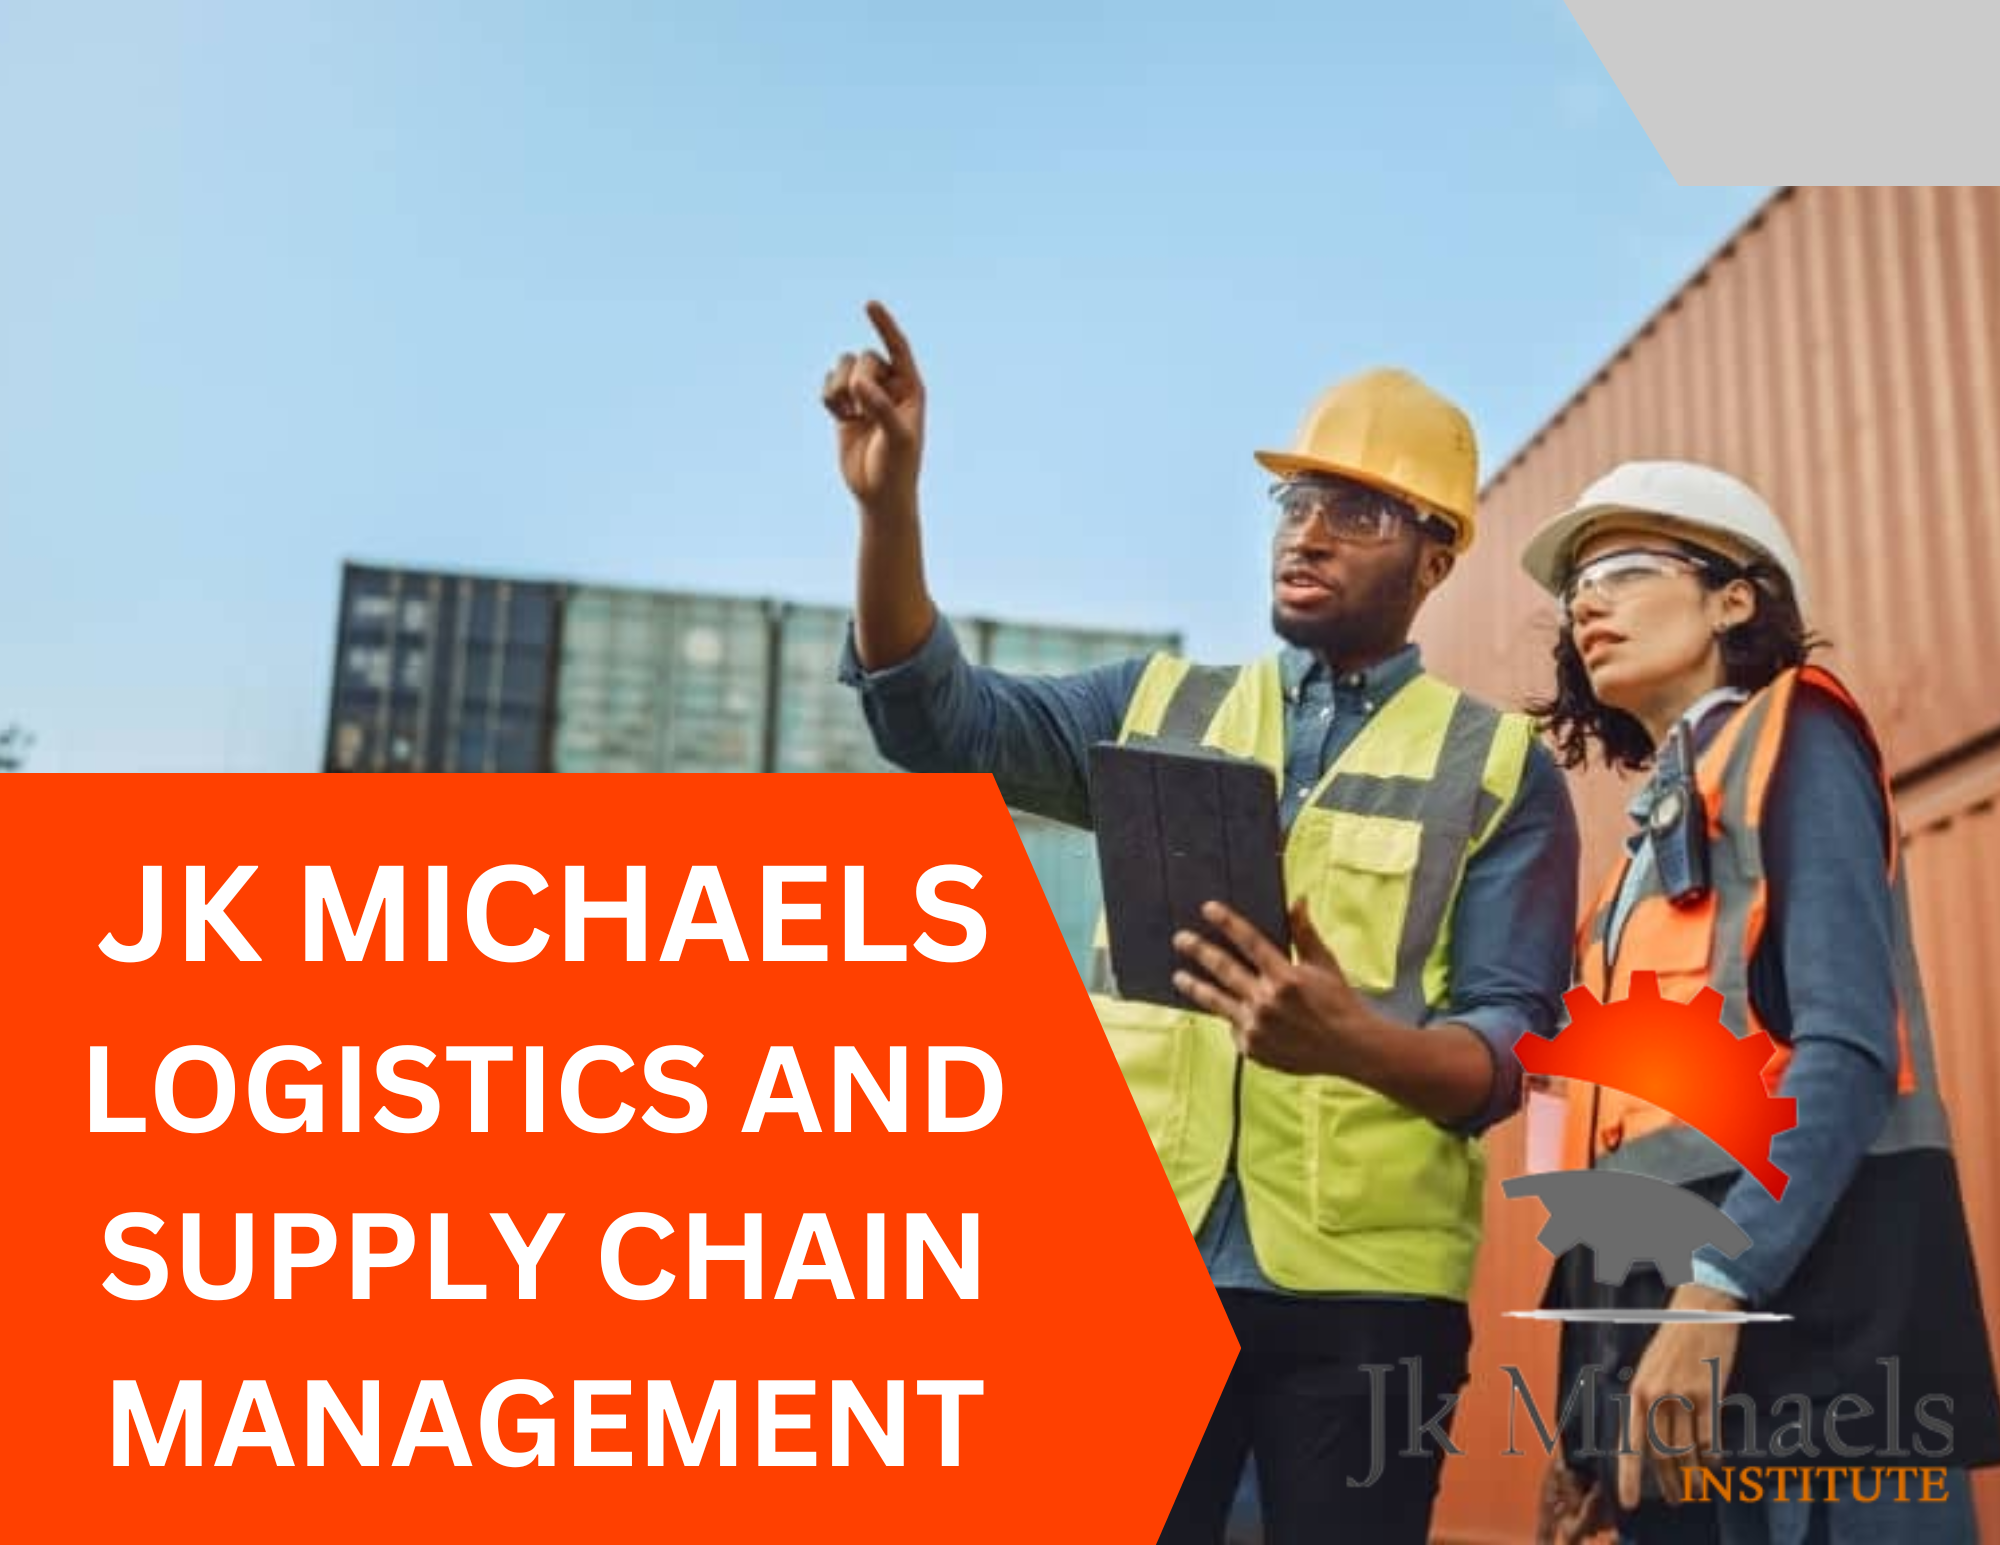 LOGISTICS AND SUPPLY CHAIN MANAGEMENT